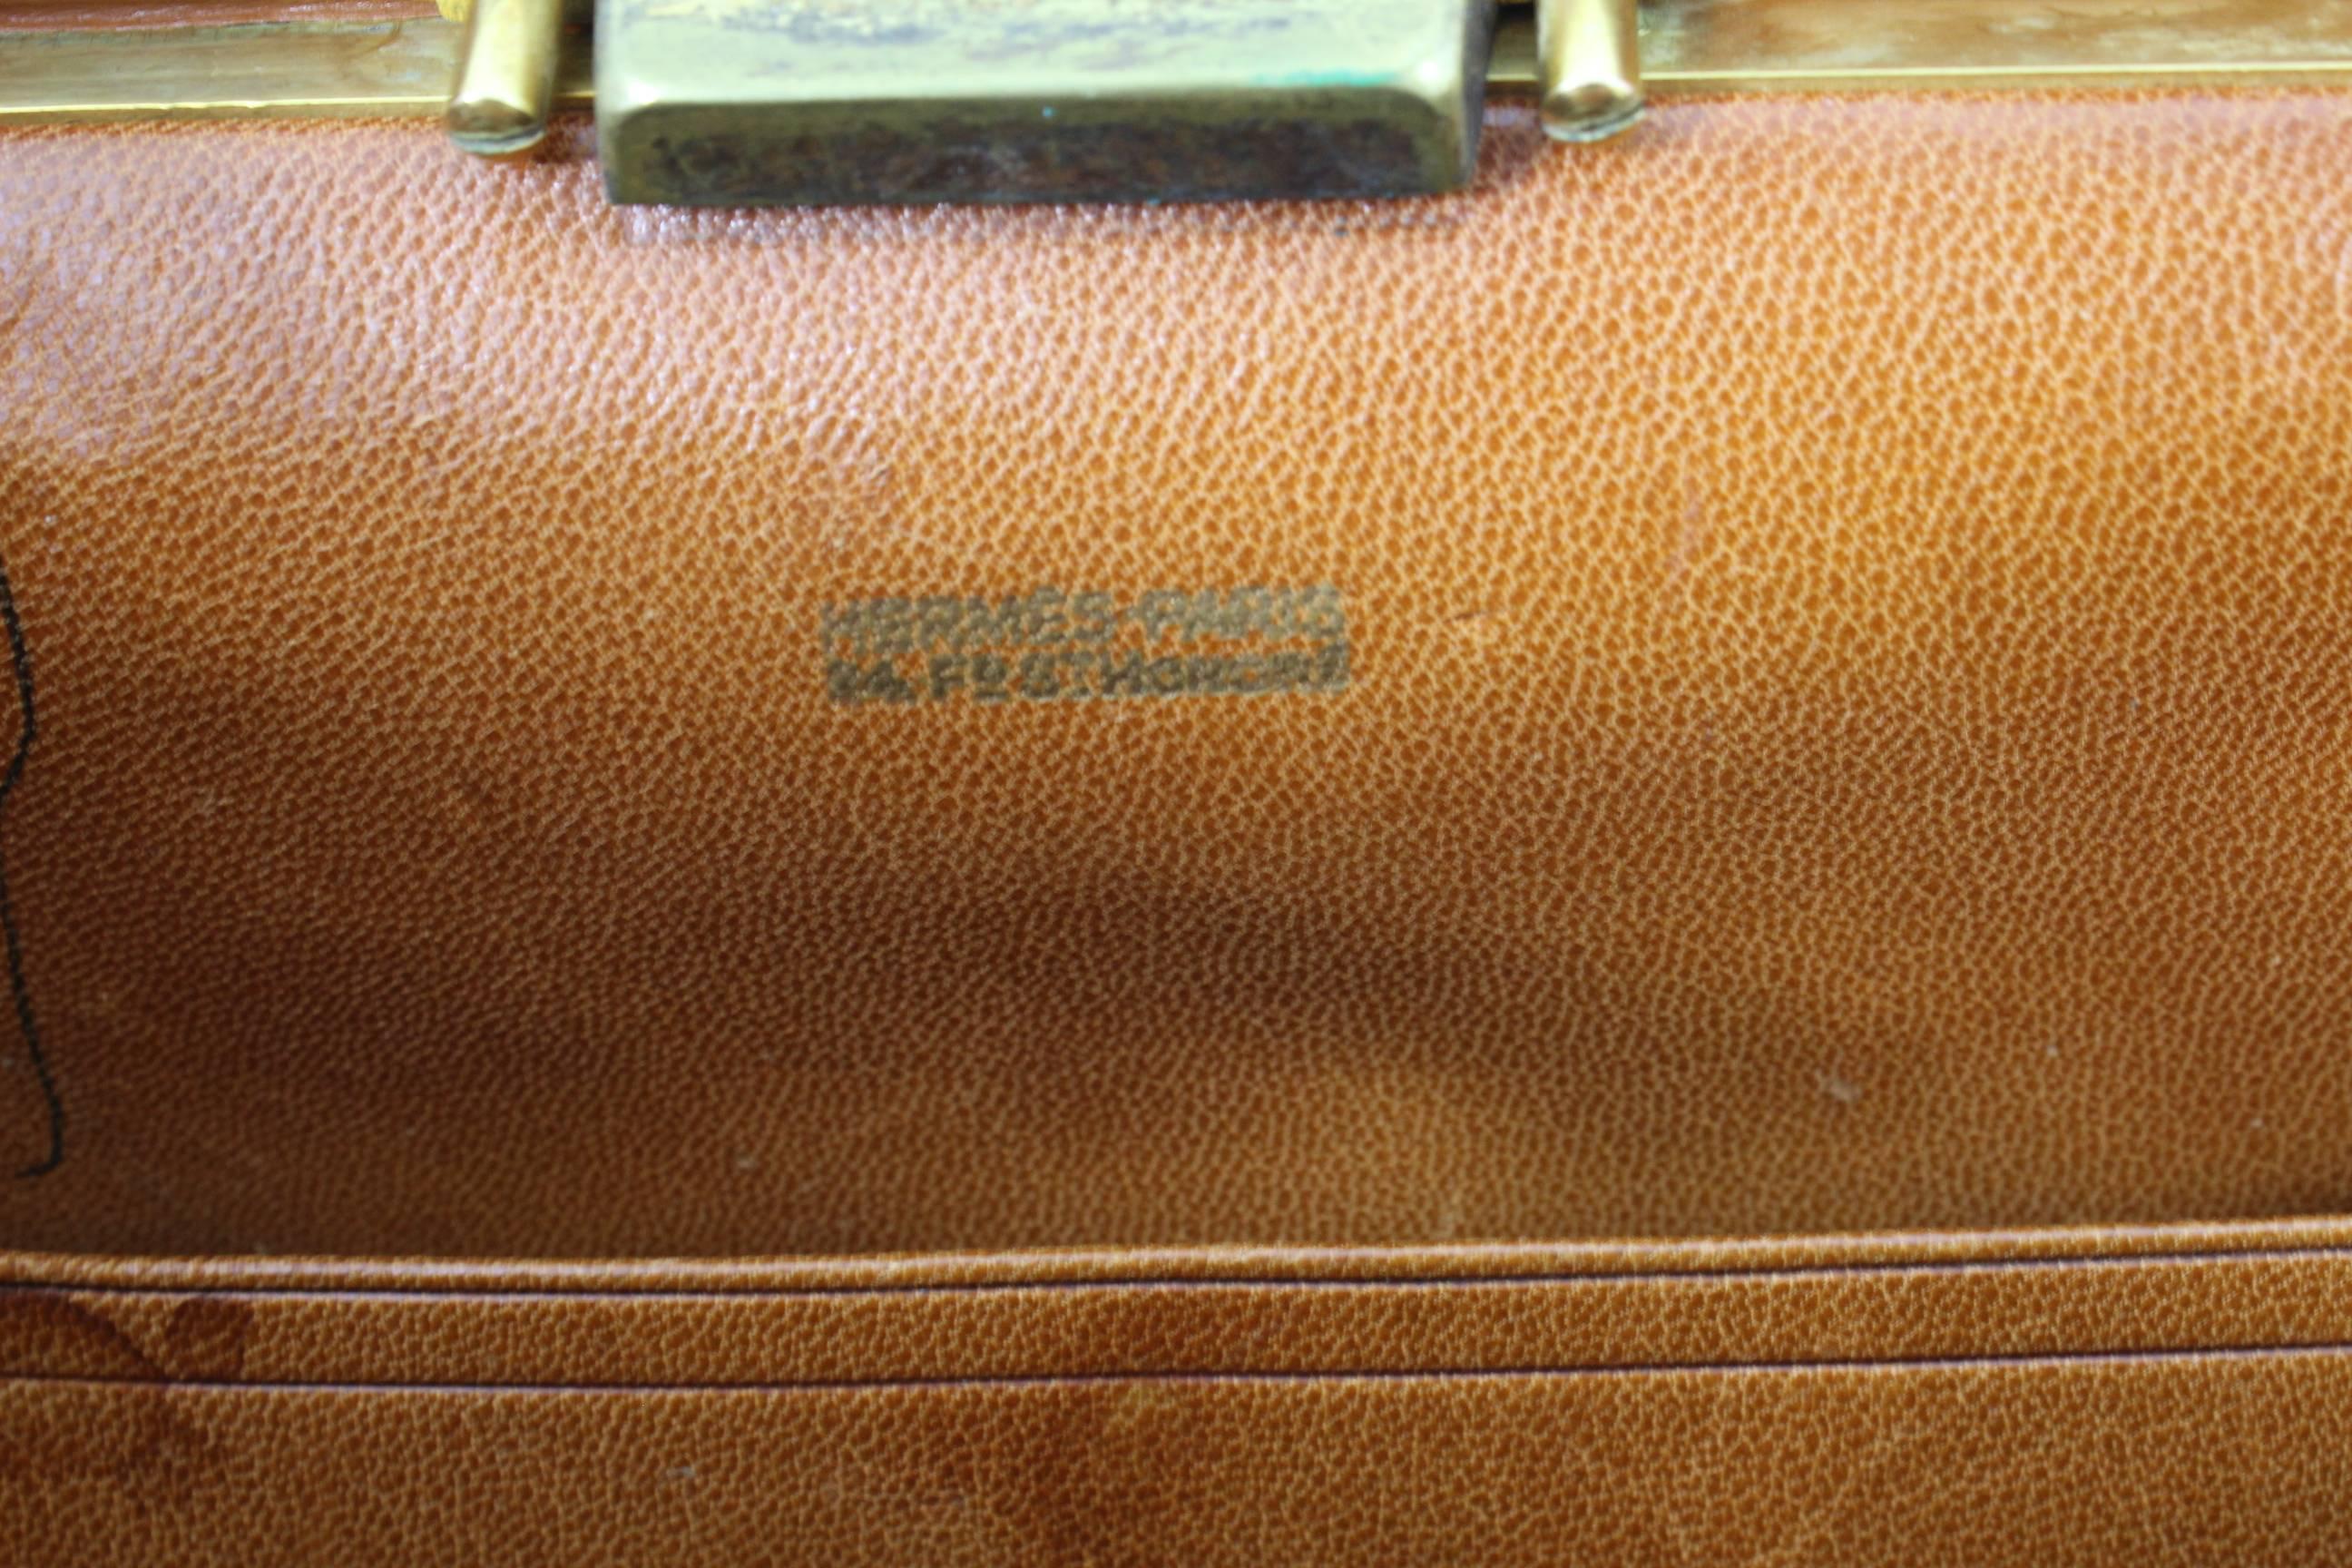 Brown Vintage Hermes Doctor Bag with Jewlery Compartiment. With 2 Keys